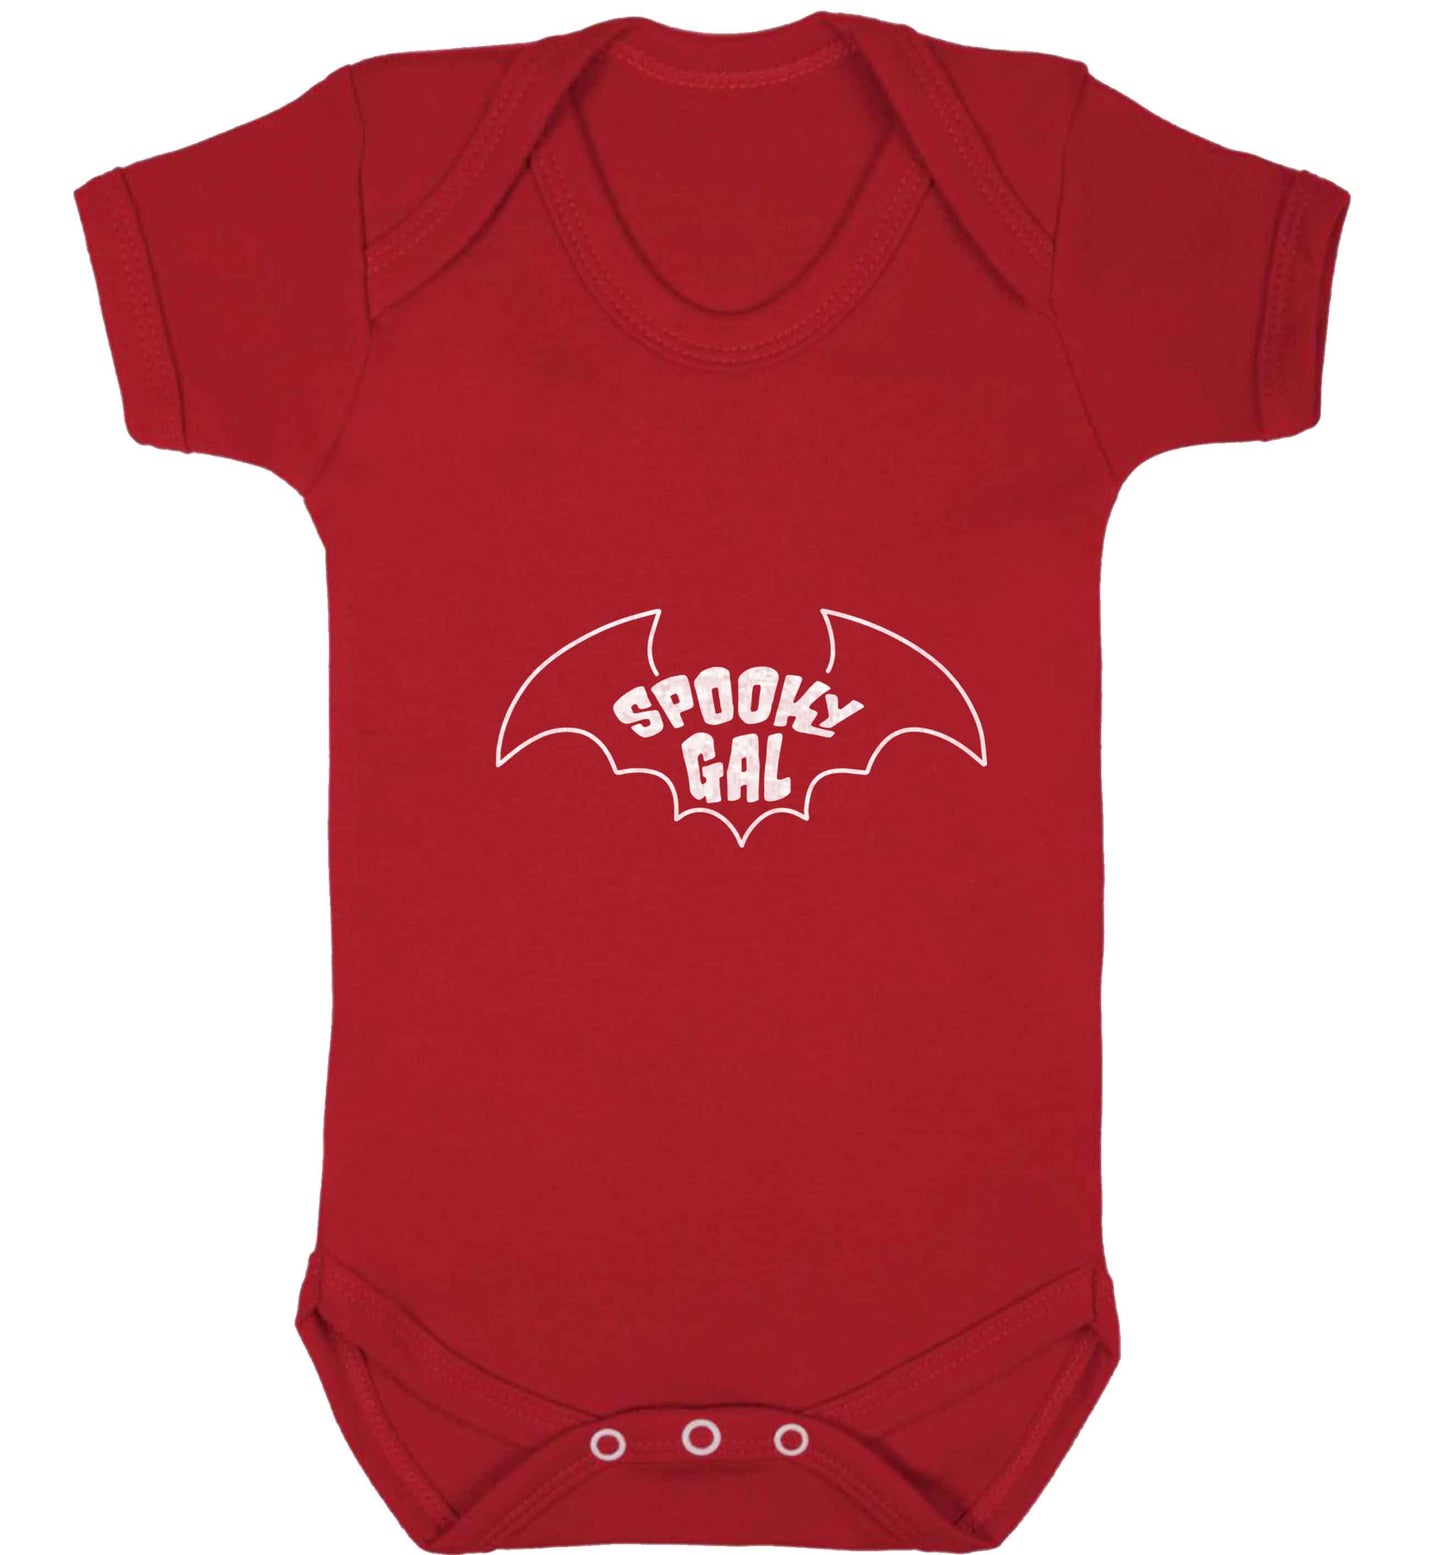 Spooky gal Kit baby vest red 18-24 months